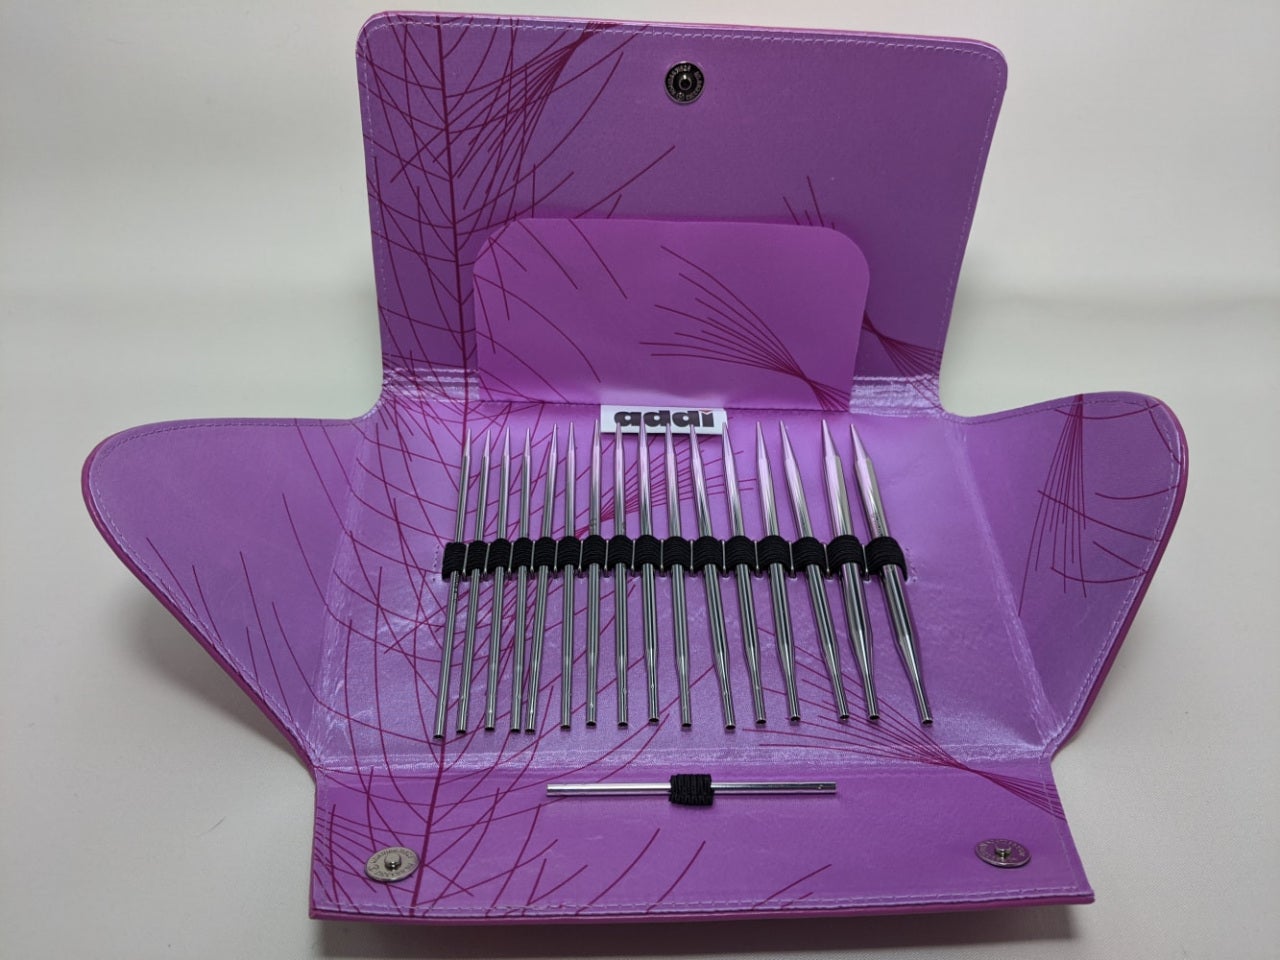 ChiaoGoo Interchangeable Knitting Needle Accessories at The Endless Skein